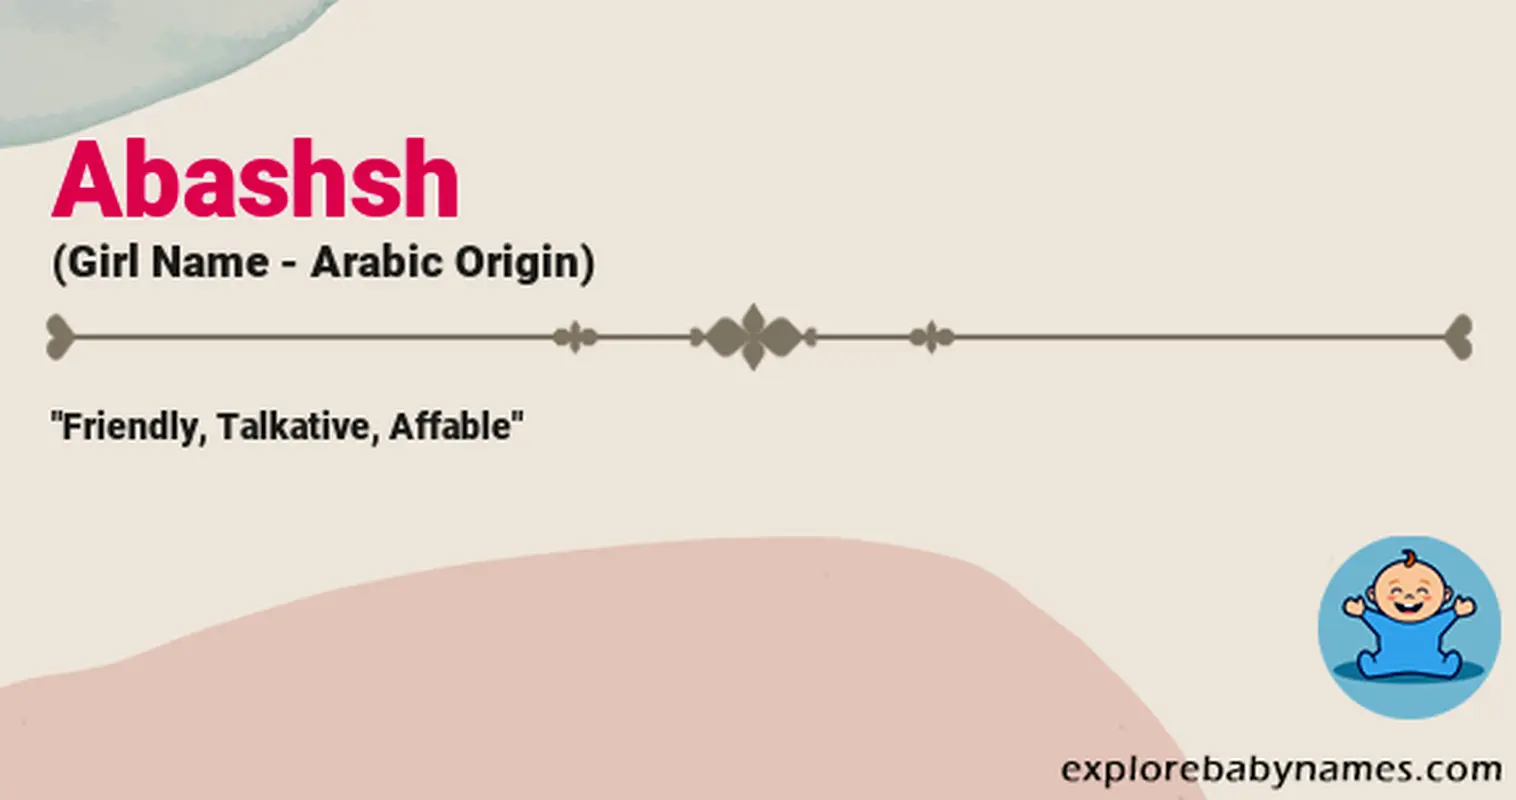 Meaning of Abashsh